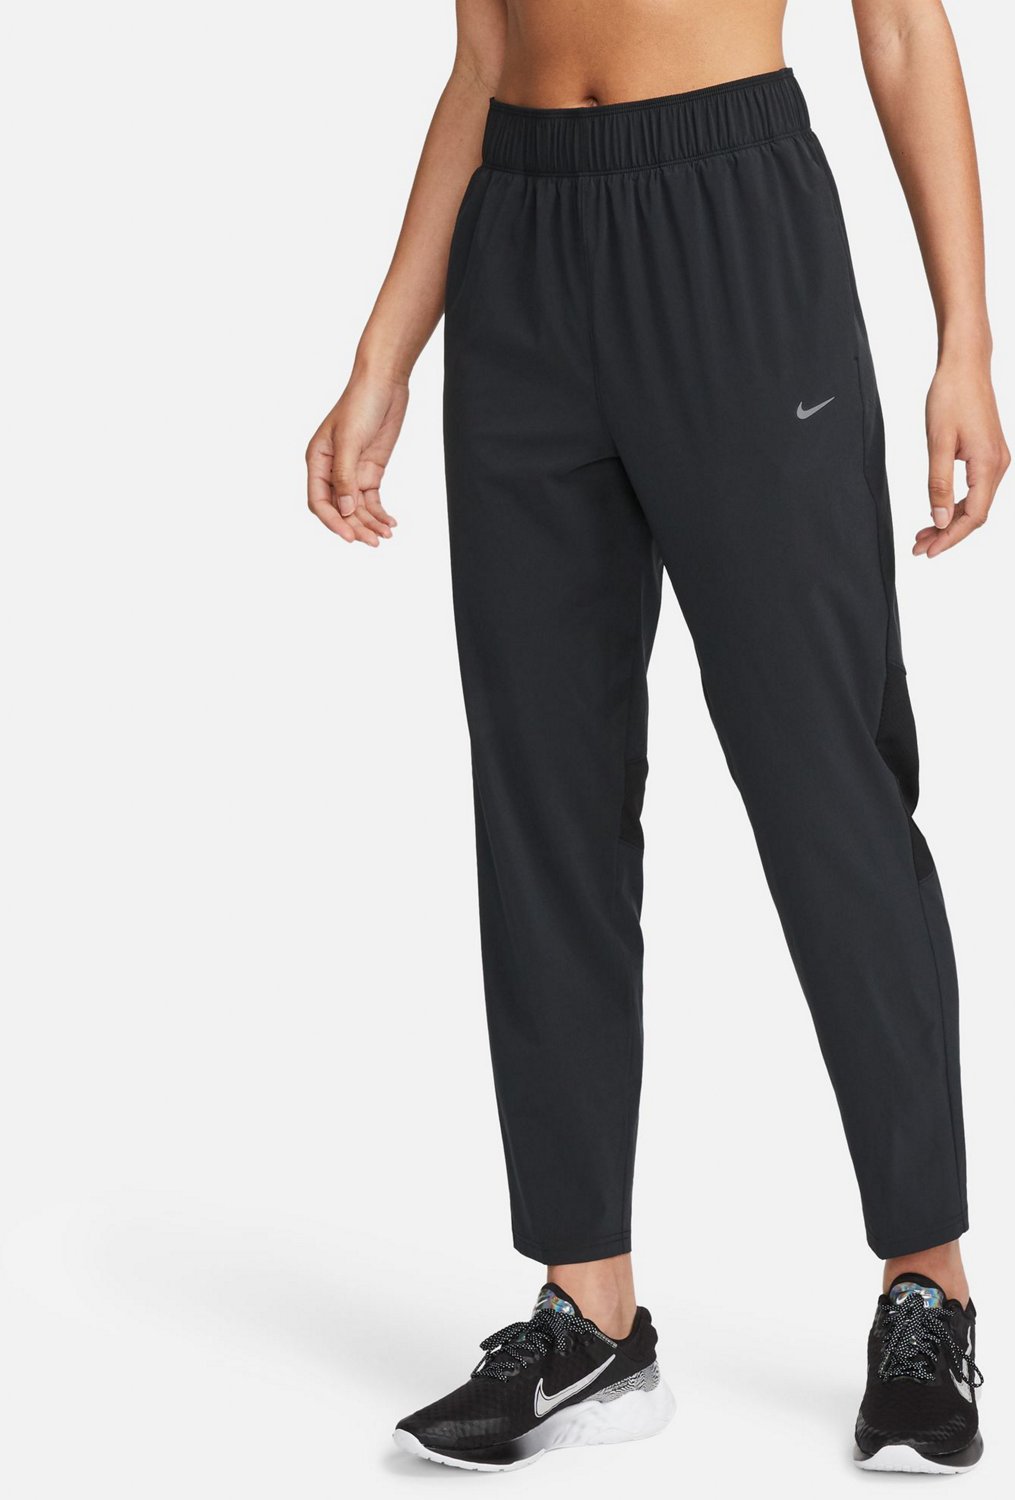 Nike Women's Fast Dri-FIT Firm Support Mid-Rise Pants | Academy